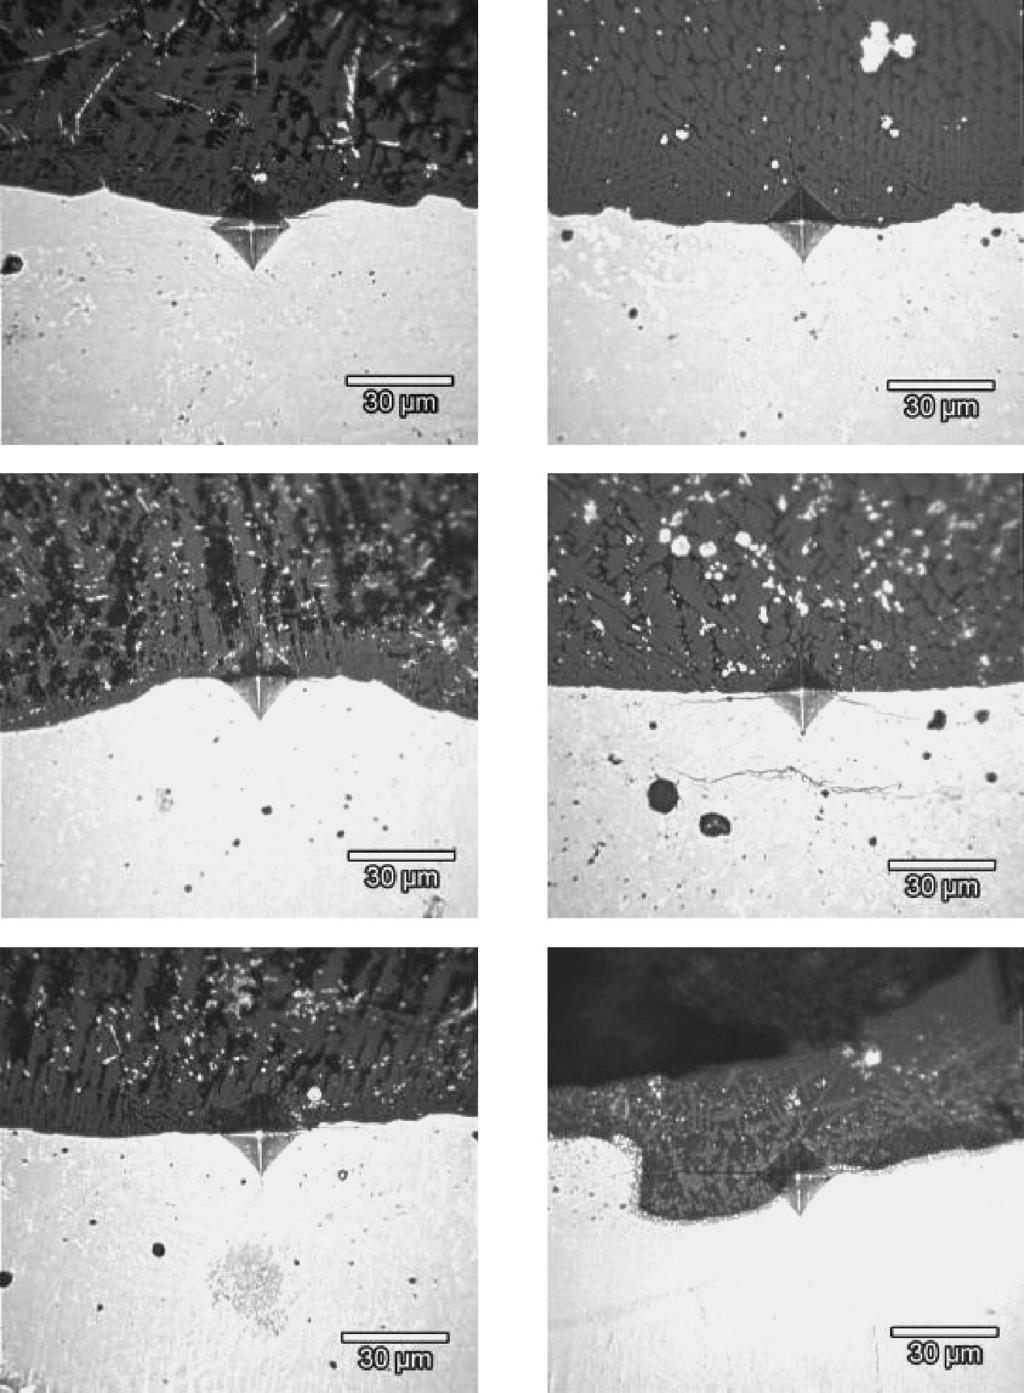 Effects of Different Hydroxyapatite Binders on Morphology, Ca/P Ratio and Hardness of Nd-YAG Laser Clad Coatings 2857 Power (W) 74 115 Travel Speed (mm/min) 2 3 4 3 4 5 PVA Binder WG Fig.